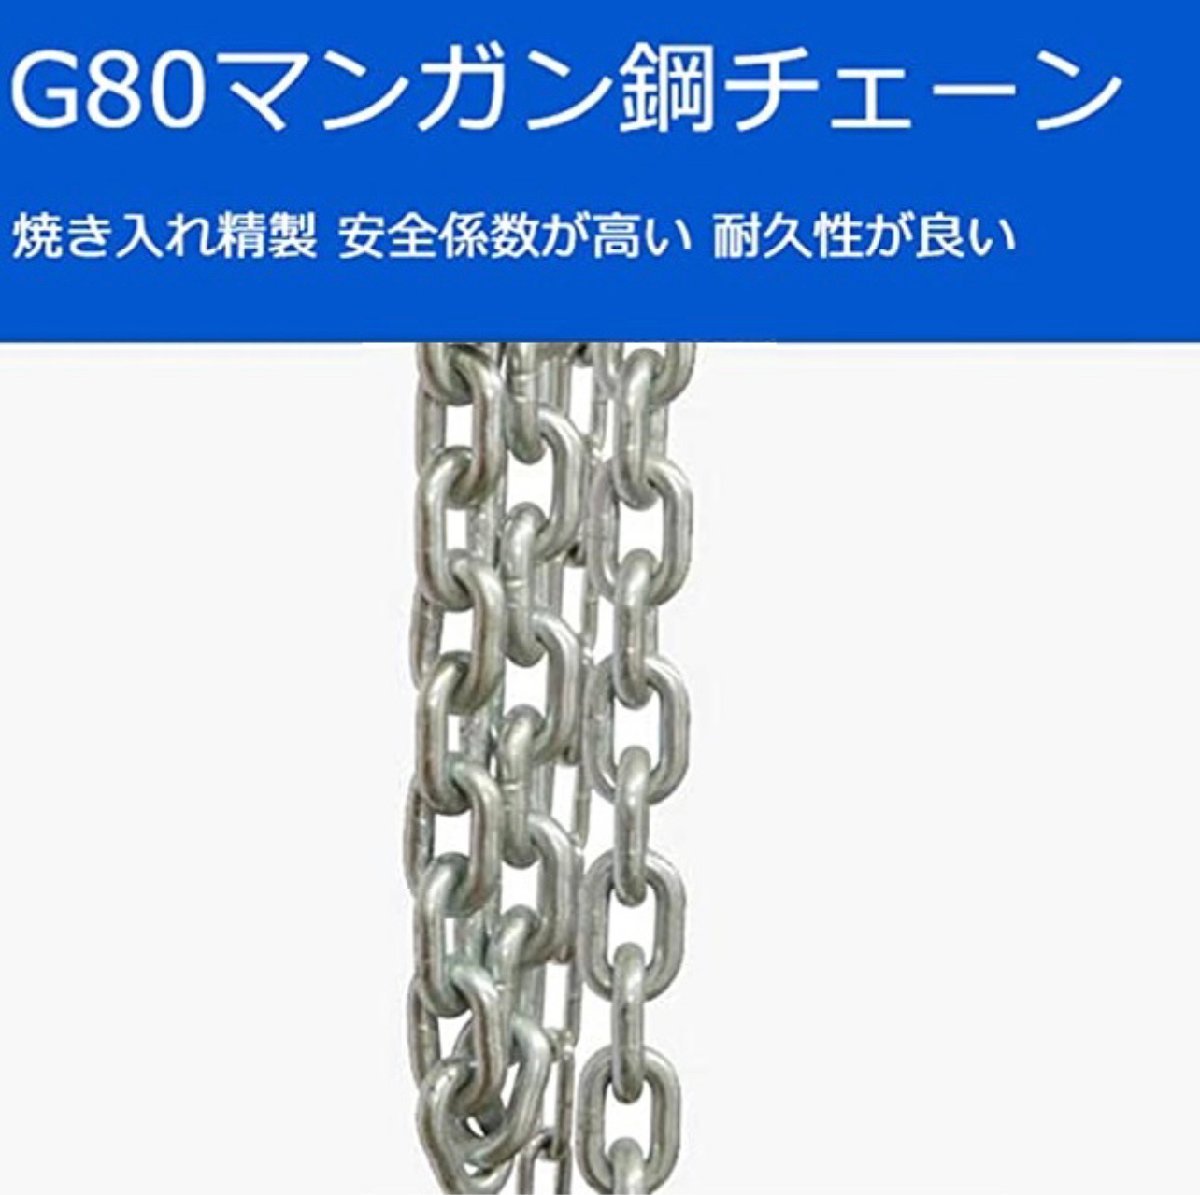  three person is good light weight red lever hoist 0.25ton lever block 250kg(0.25ton) chain ho chair lever block chain block chain ga